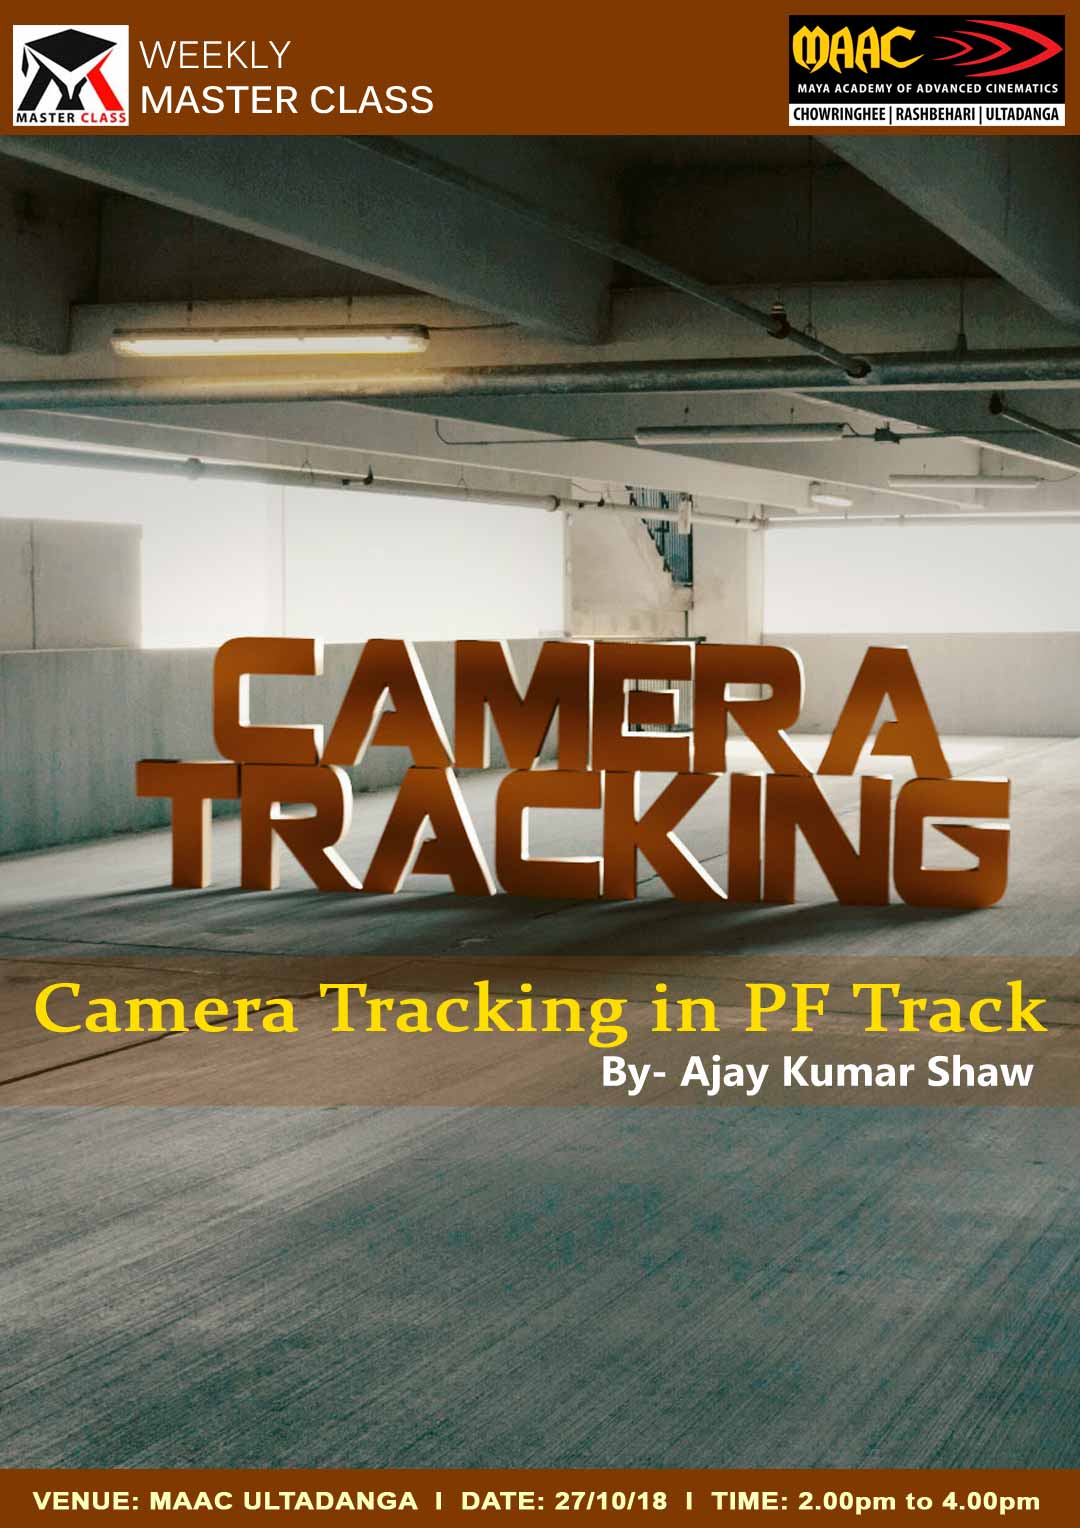 Weekly Master Class on Camera Tracking in PF Track